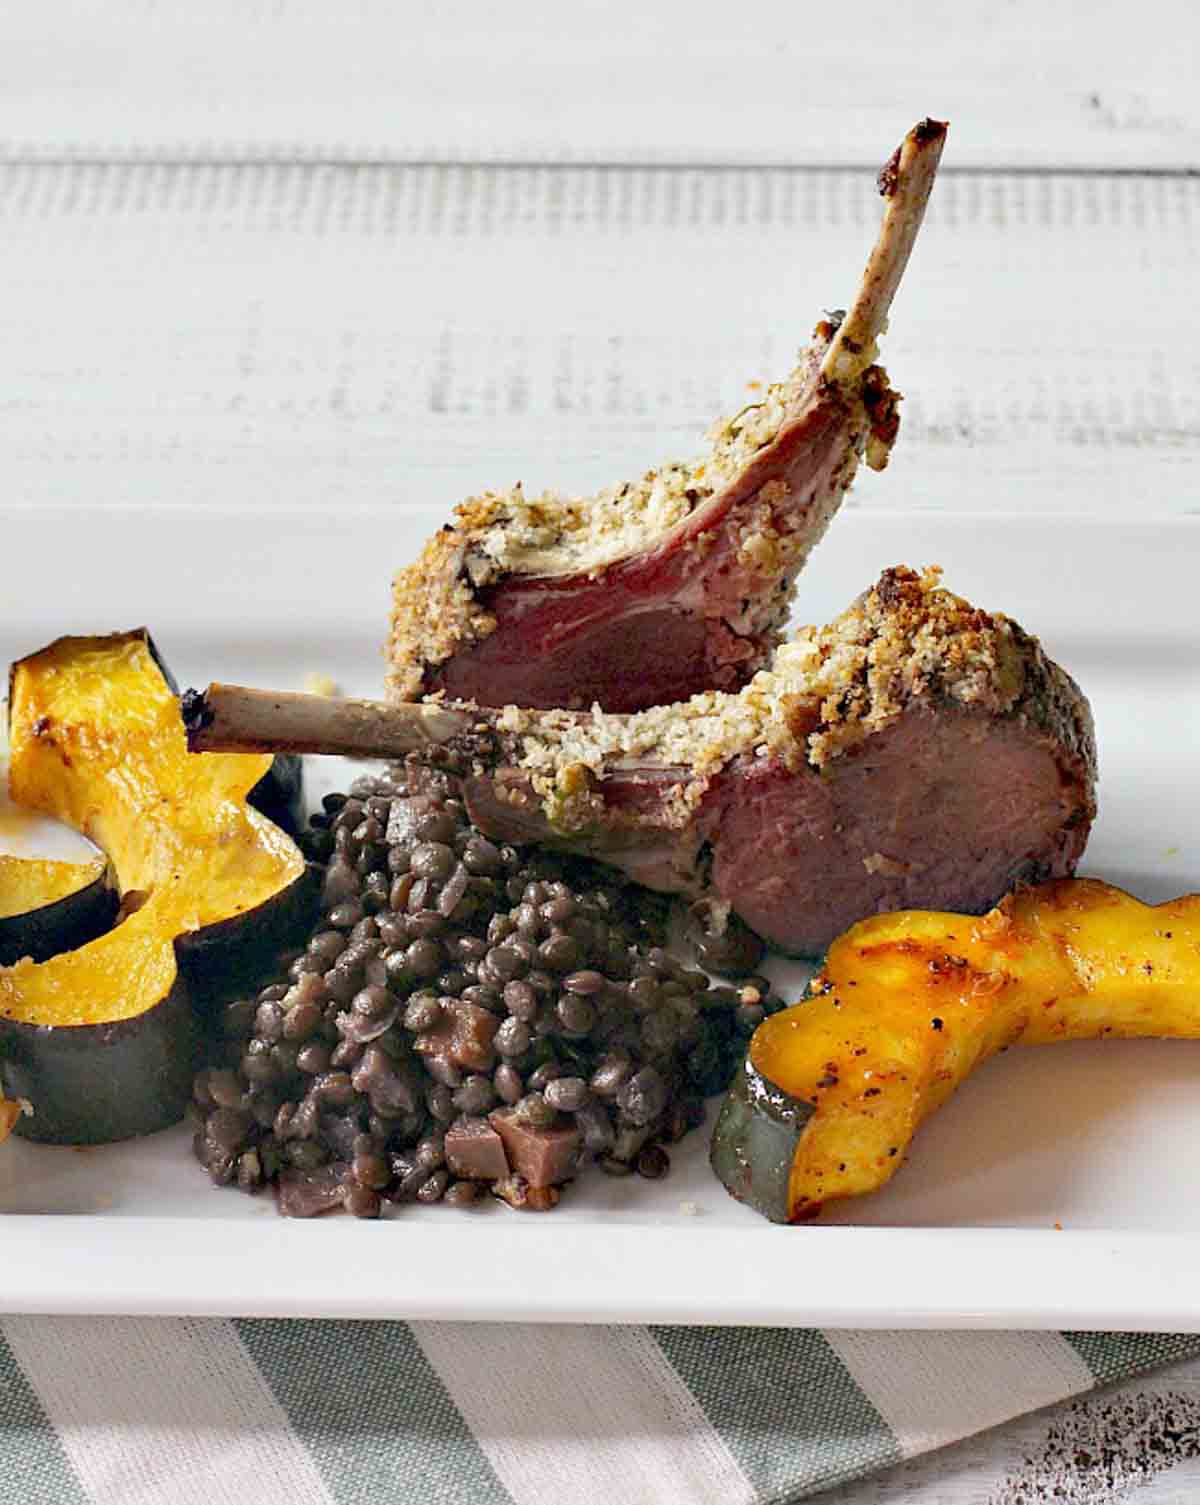 Pistachio crusted lamb chops with lentils and winter squash.